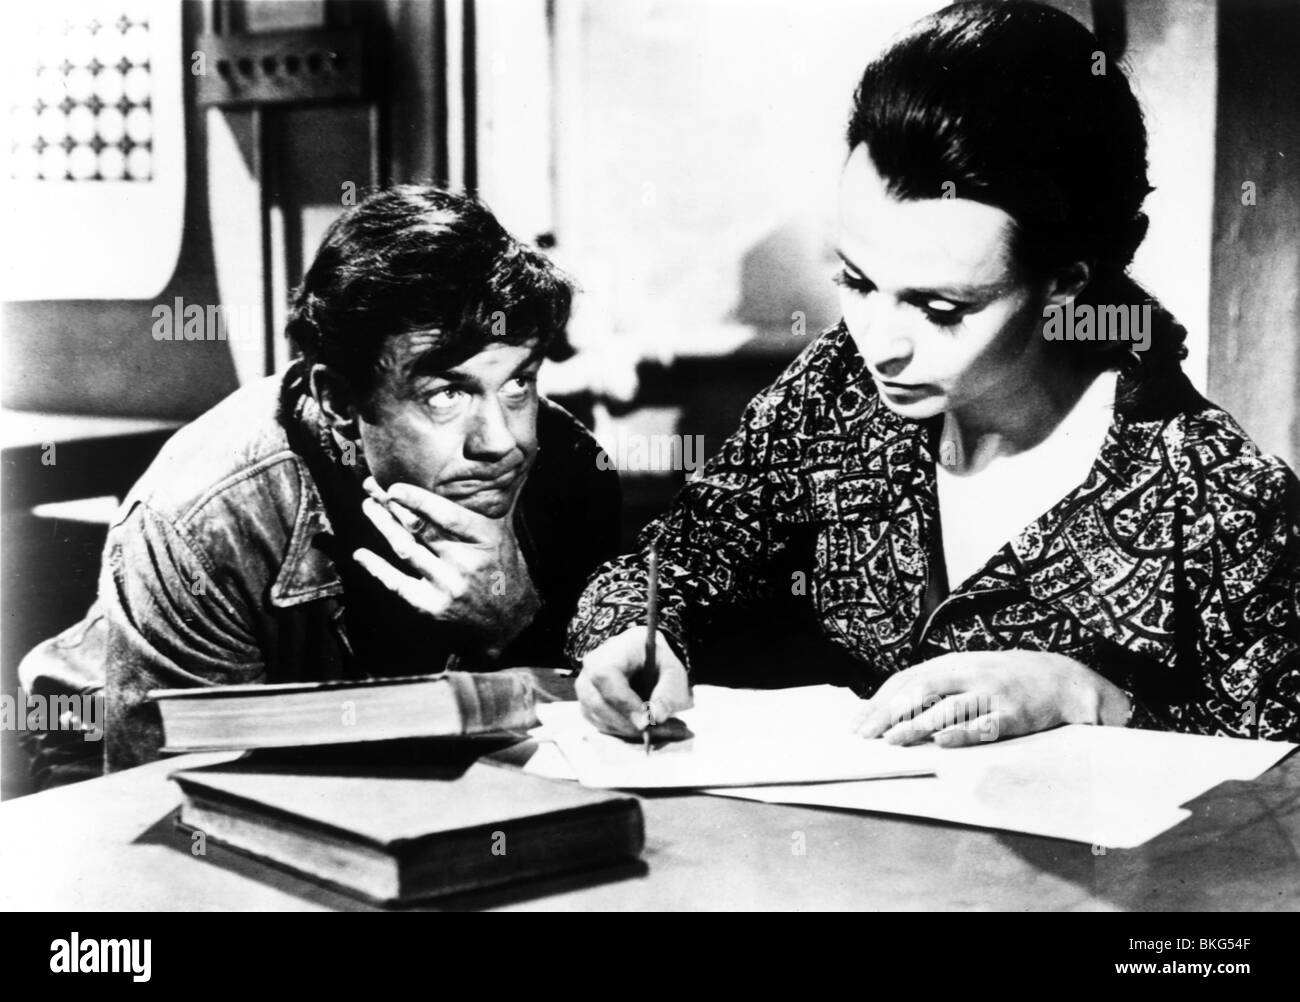 CHARLY (1969) CLIFF ROBERTSON, CLAIRE BLOOM CHRL 001P L Stock Photo